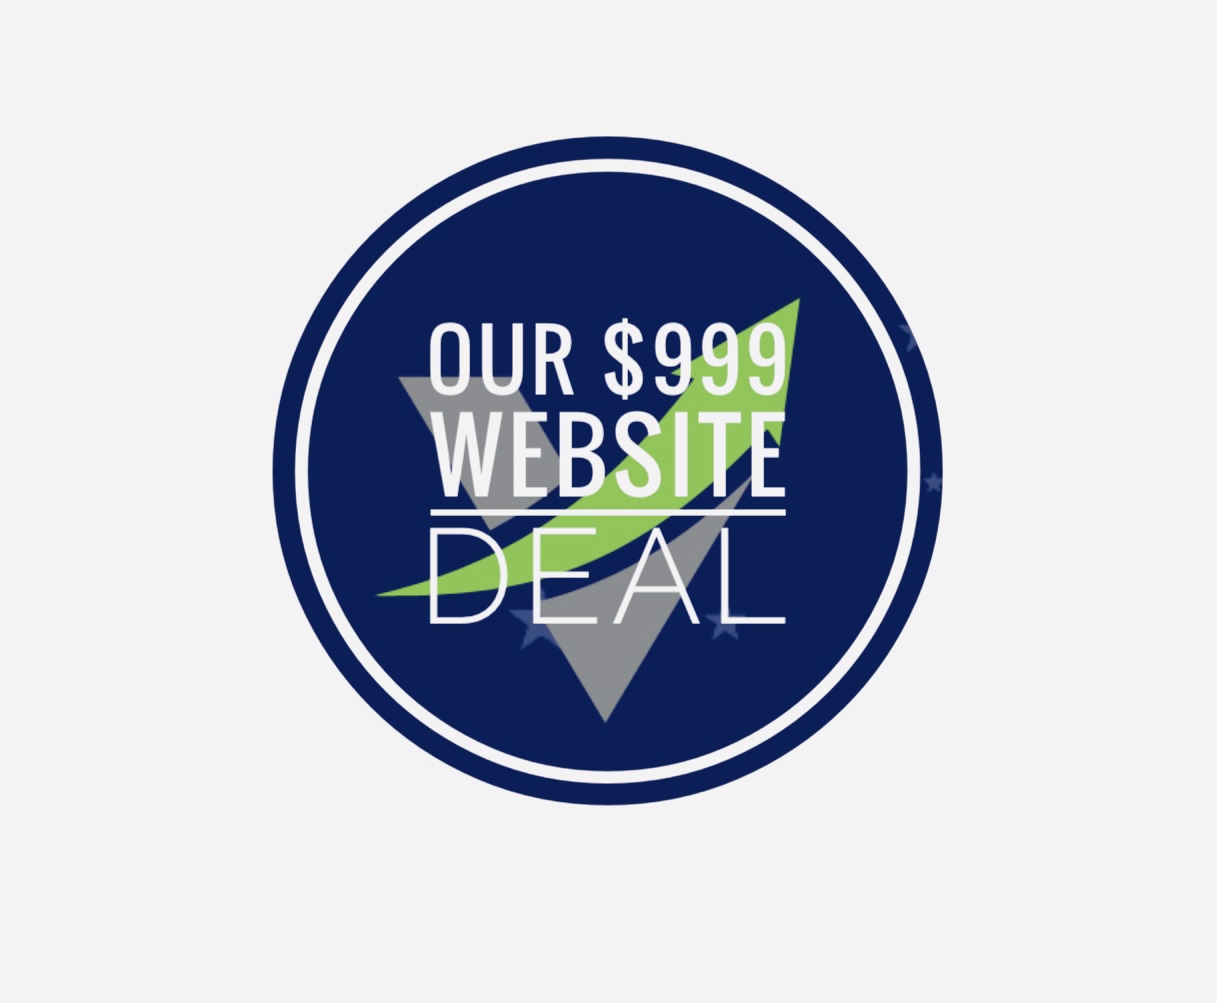 Our $999 Website Deal